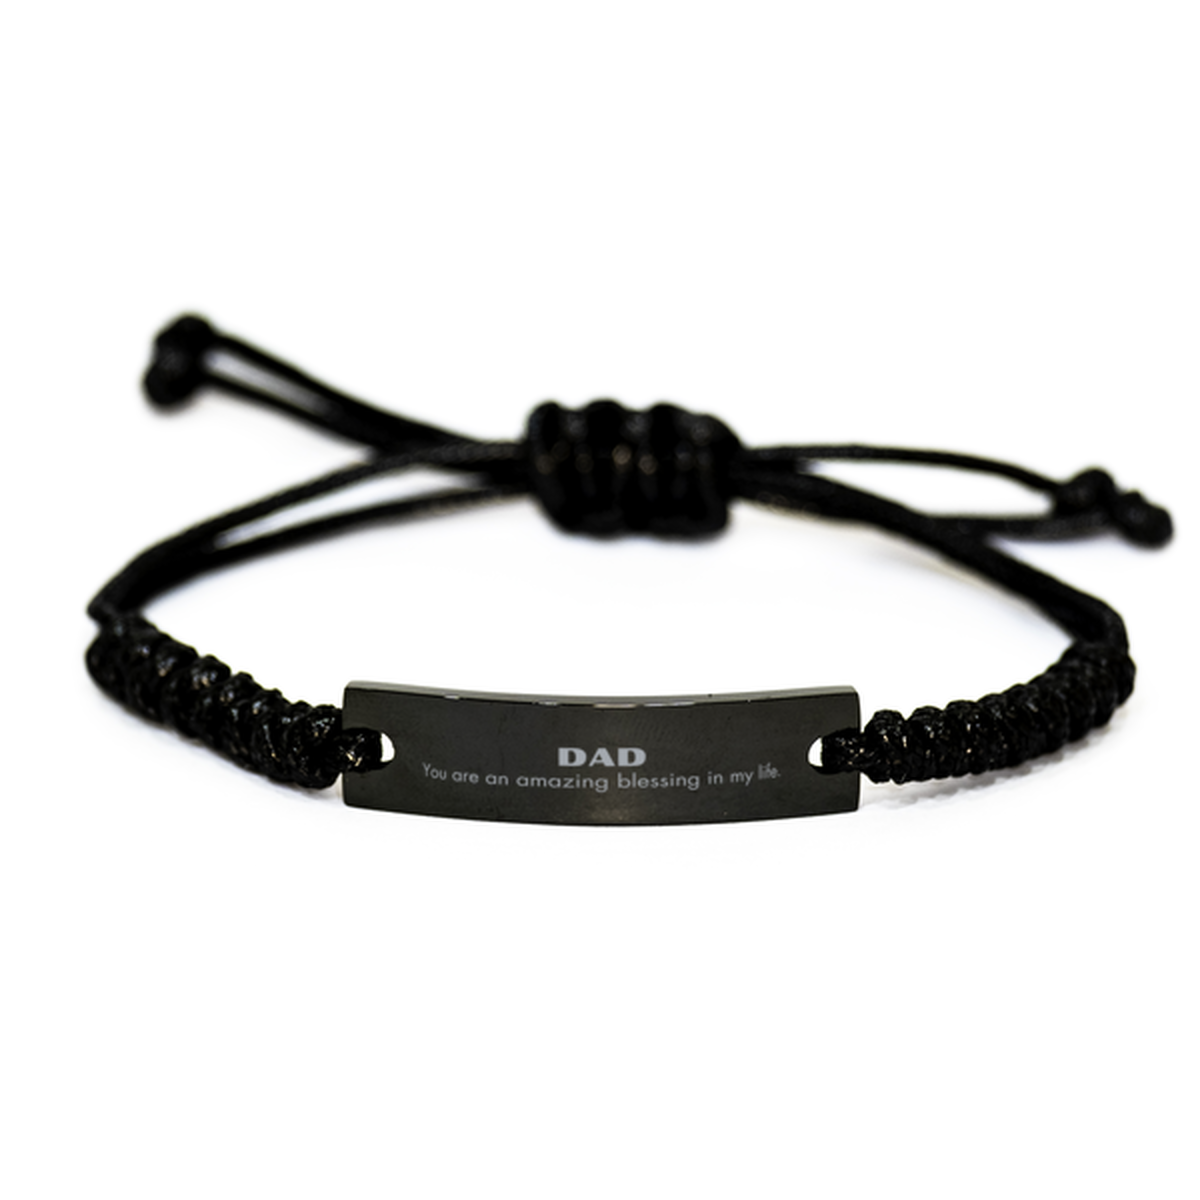 Dad Black Rope Bracelet, You are an amazing blessing in my life, Thank You Gifts For Dad, Inspirational Birthday Christmas Unique Gifts For Dad